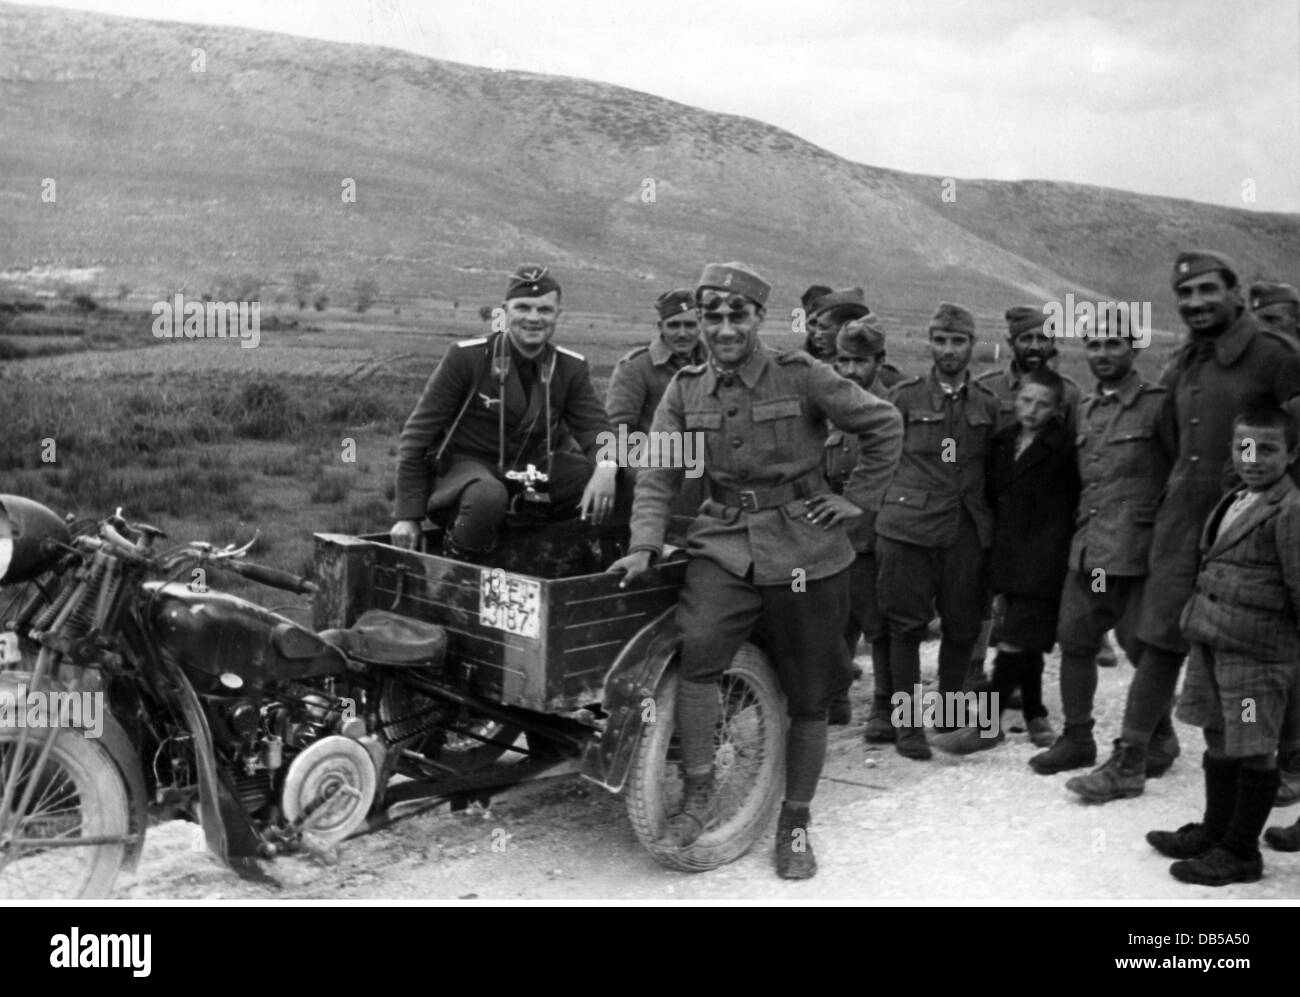 events, Second World War / WWII, Greece, Balkans Campaign 1941, Italian  soldiers with a German war correspondent, April / May 1941,  Additional-Rights-Clearences-Not Available Stock Photo - Alamy